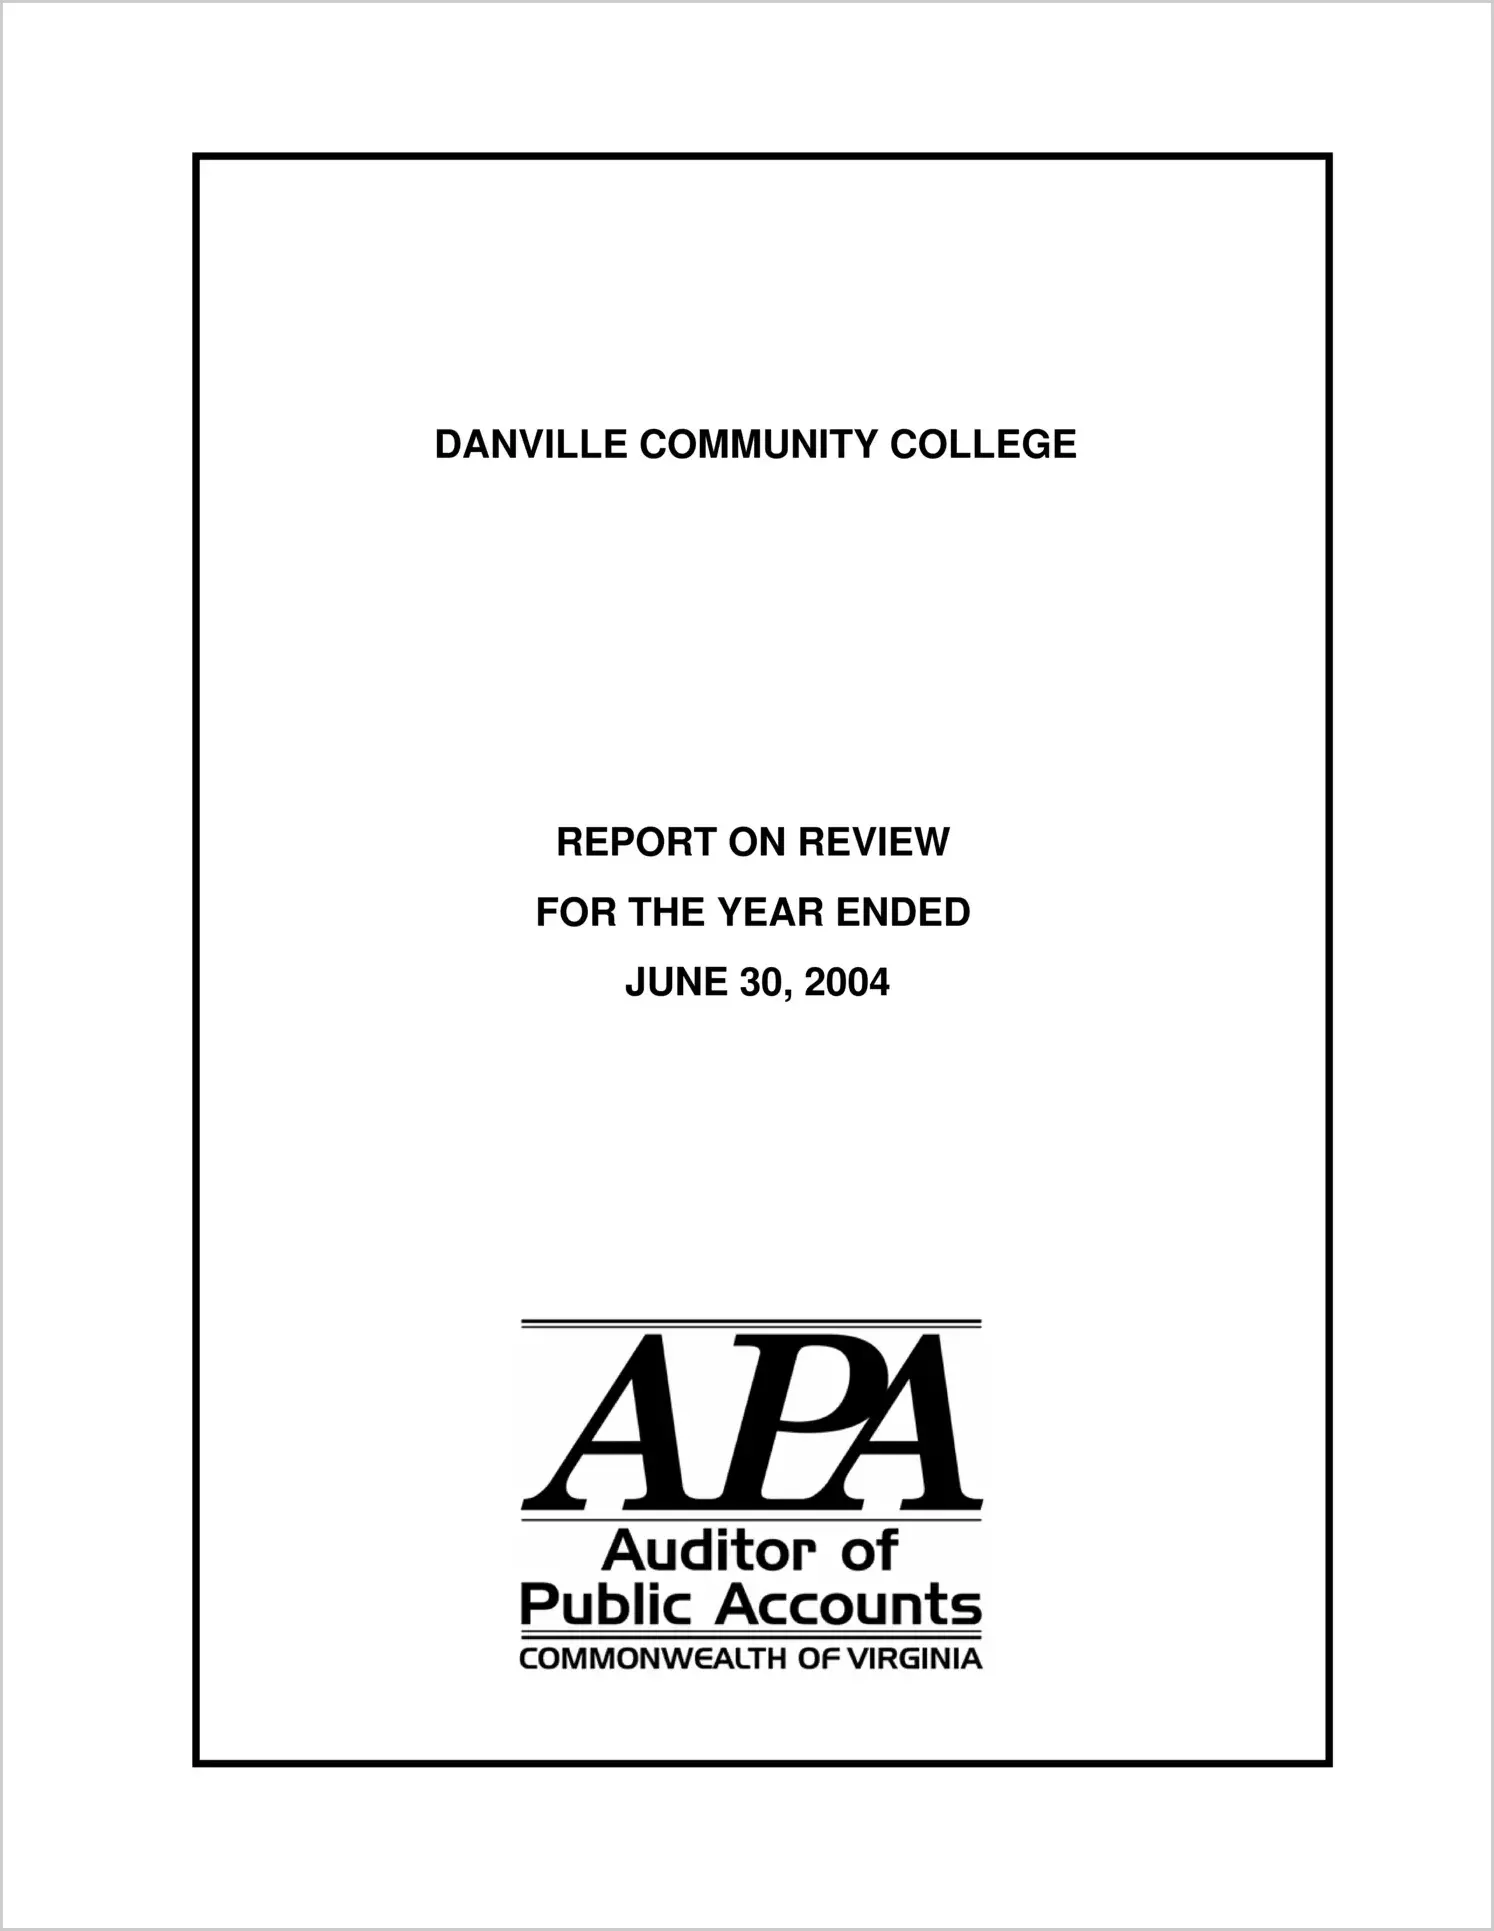 Danville Community College Report on review for the year ended June 30, 2004